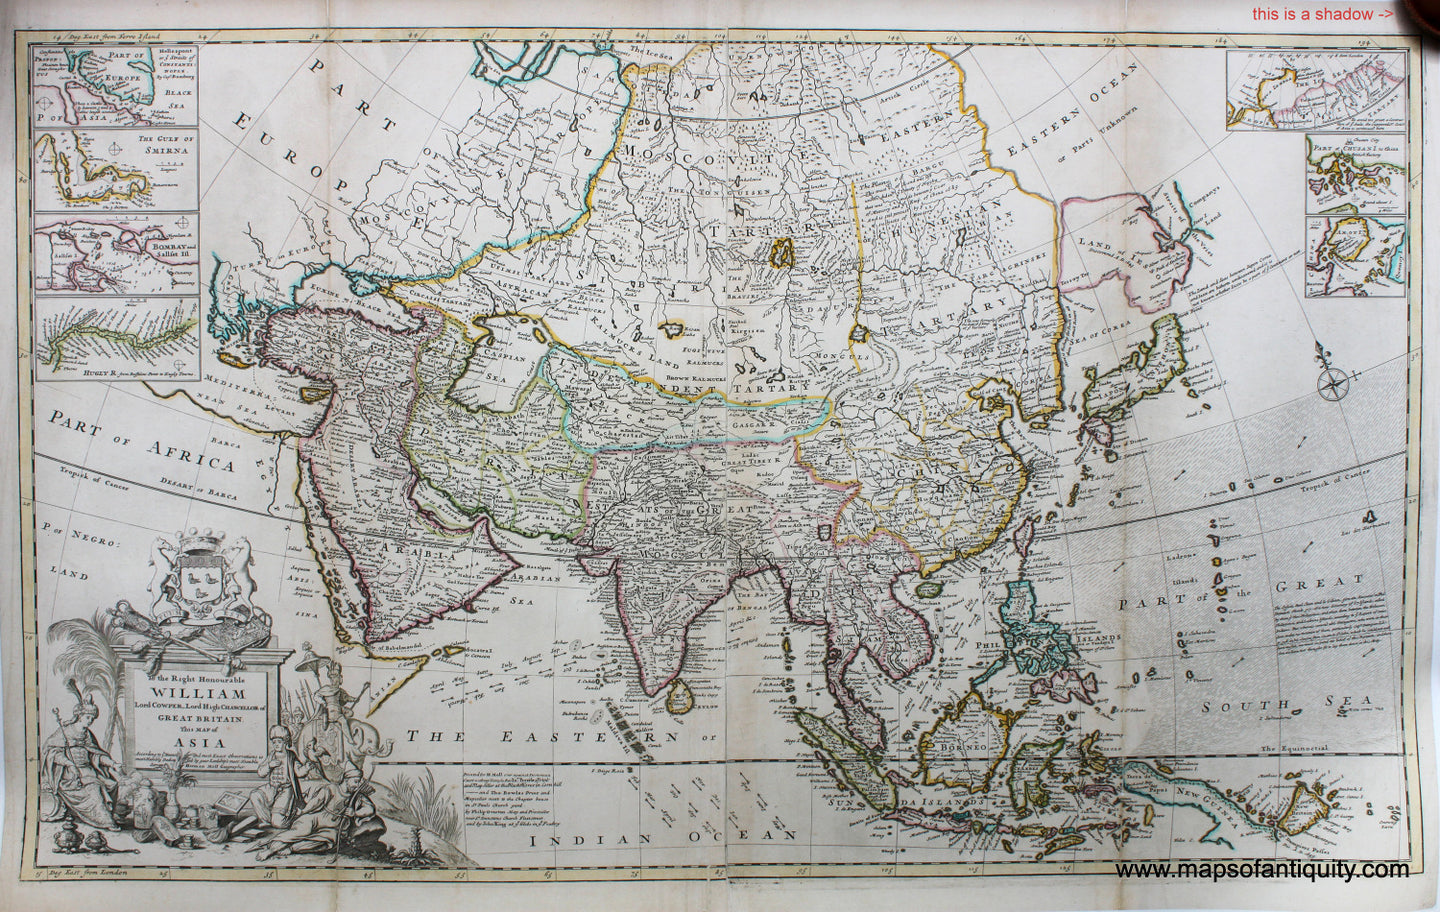 Reproduction-Herman-Moll-Map-of-Asia-Reproduction-Reproductions--circa-1732-Reproduction-Maps-Of-Antiquity